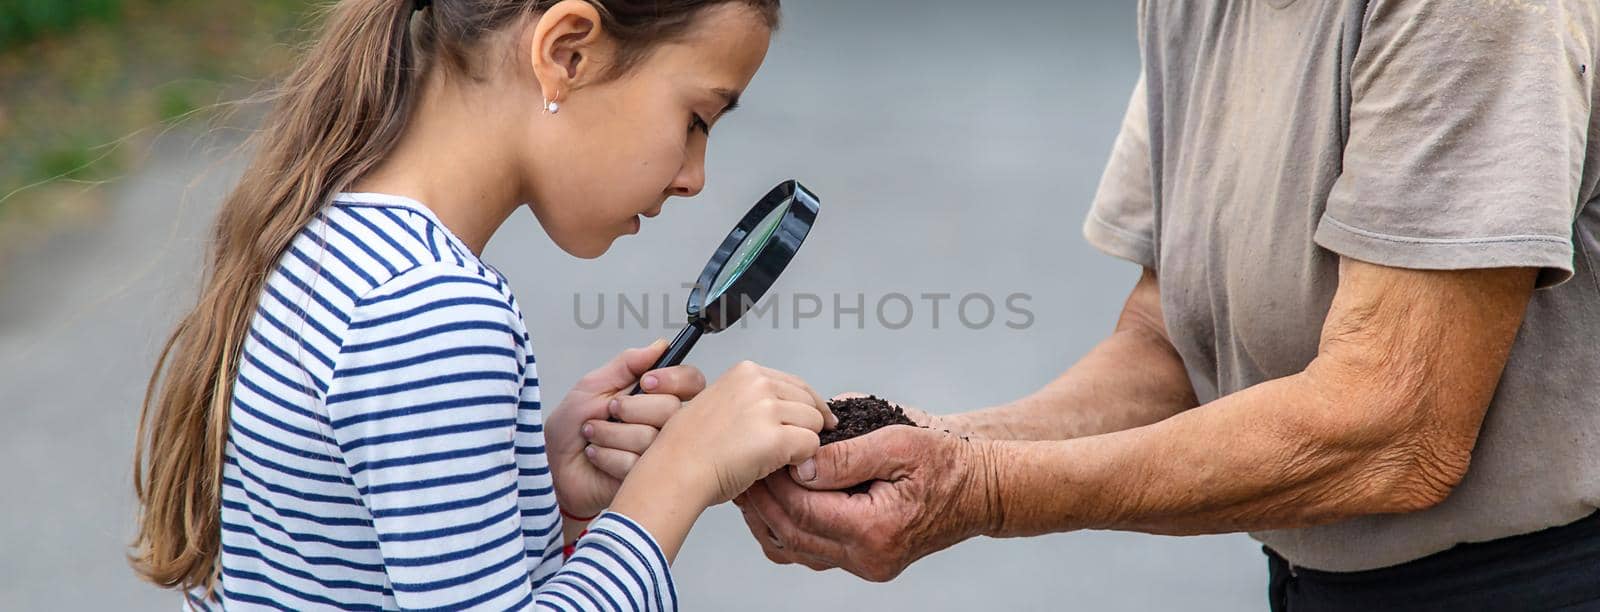 The child examines the soil with a magnifying glass. Selective focus. by yanadjana